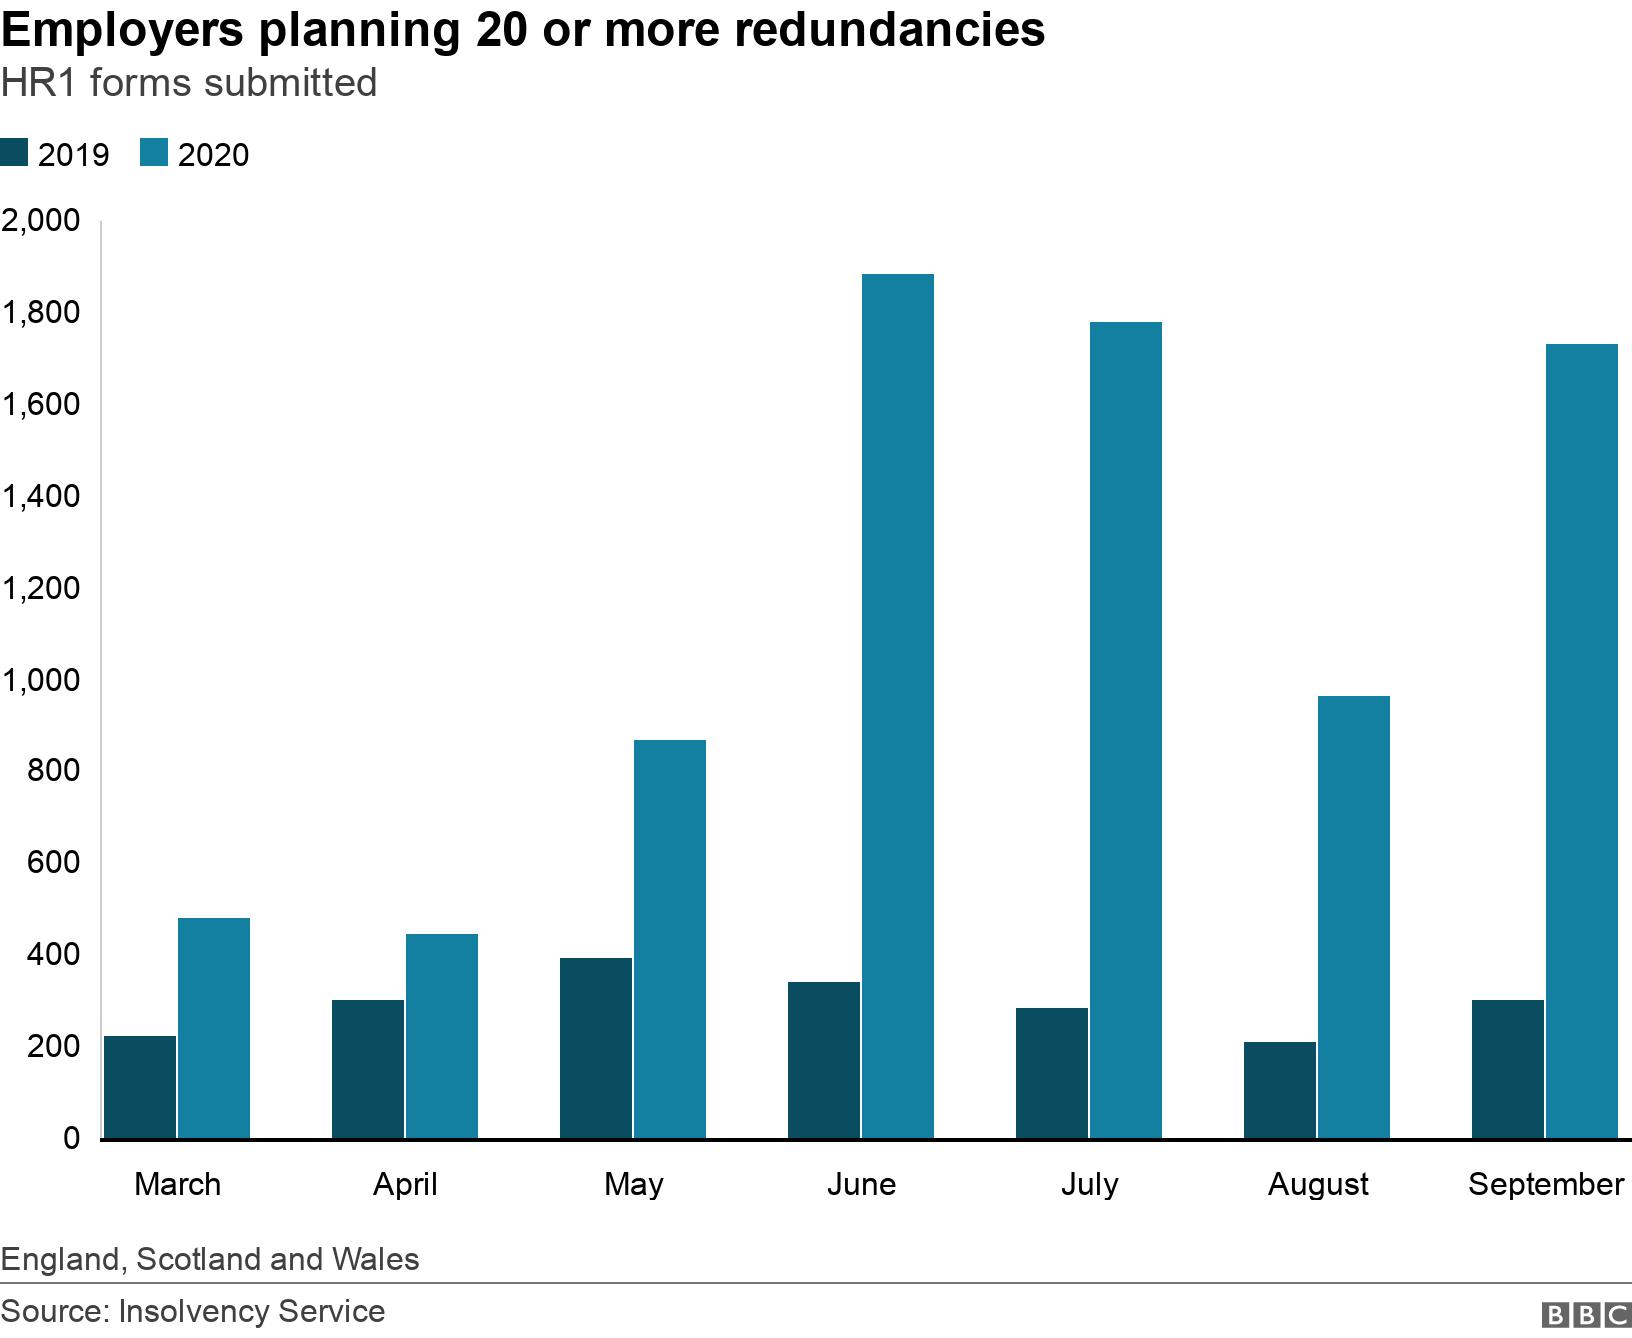 Employers planning 20 or more redundancies. HR1 forms submitted. Column chart comparing the number of HR1 forms submitted from March to September 2019 with the same months in 2020. England, Scotland and Wales.